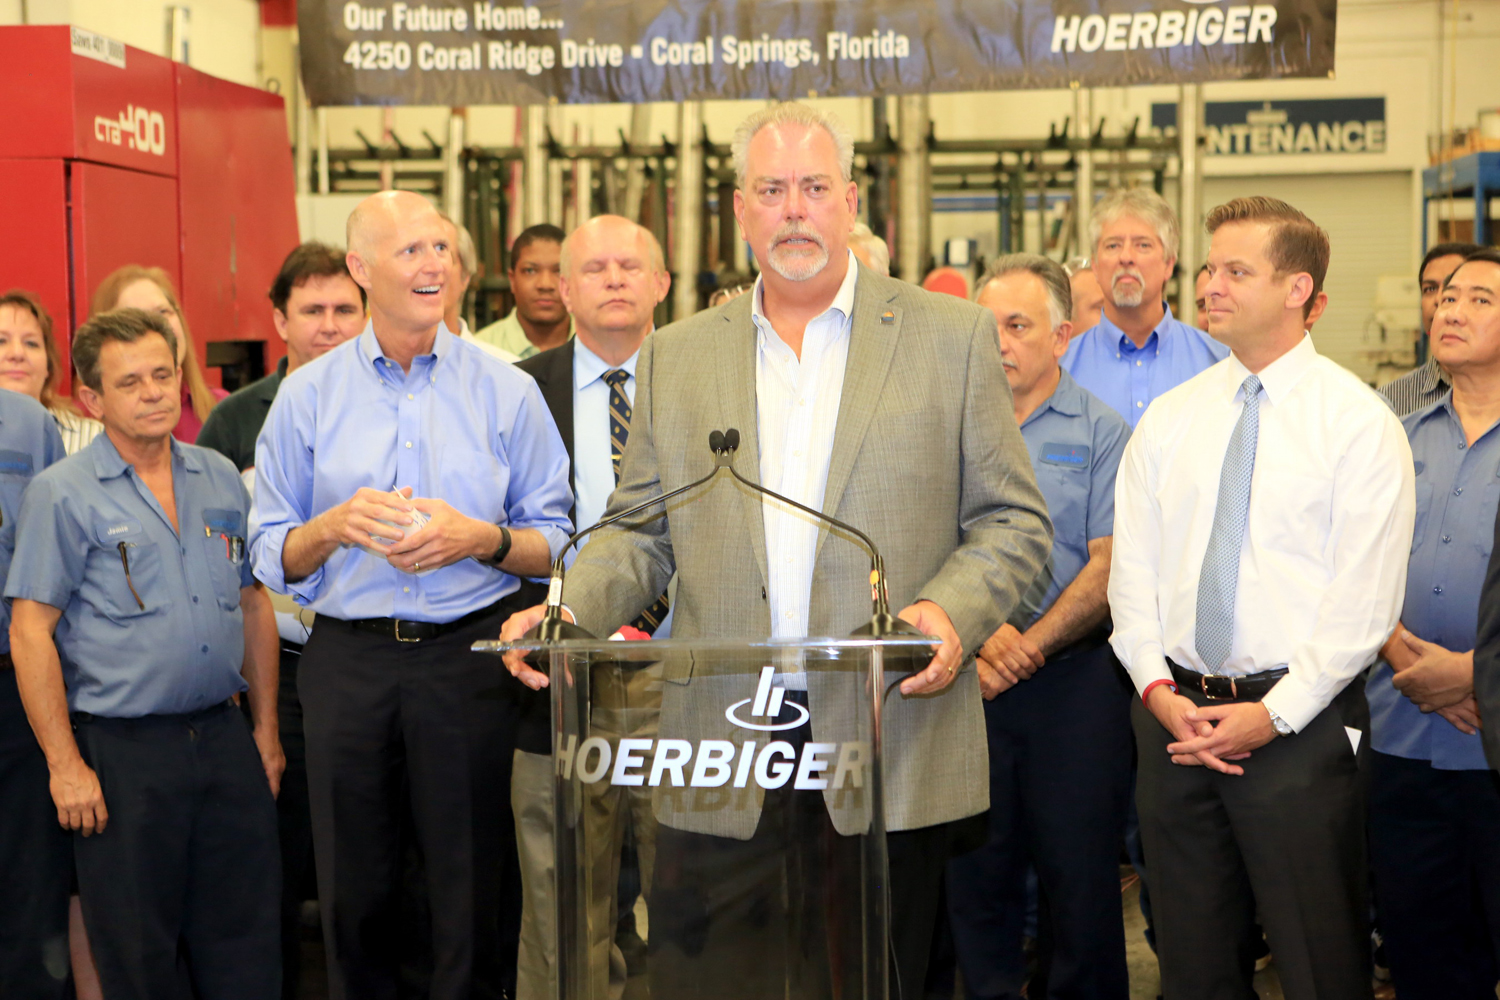 Don York, President of Hoerbiger along with Governor Rick Scott today during the announcement. - Photos by Jim Donnelly